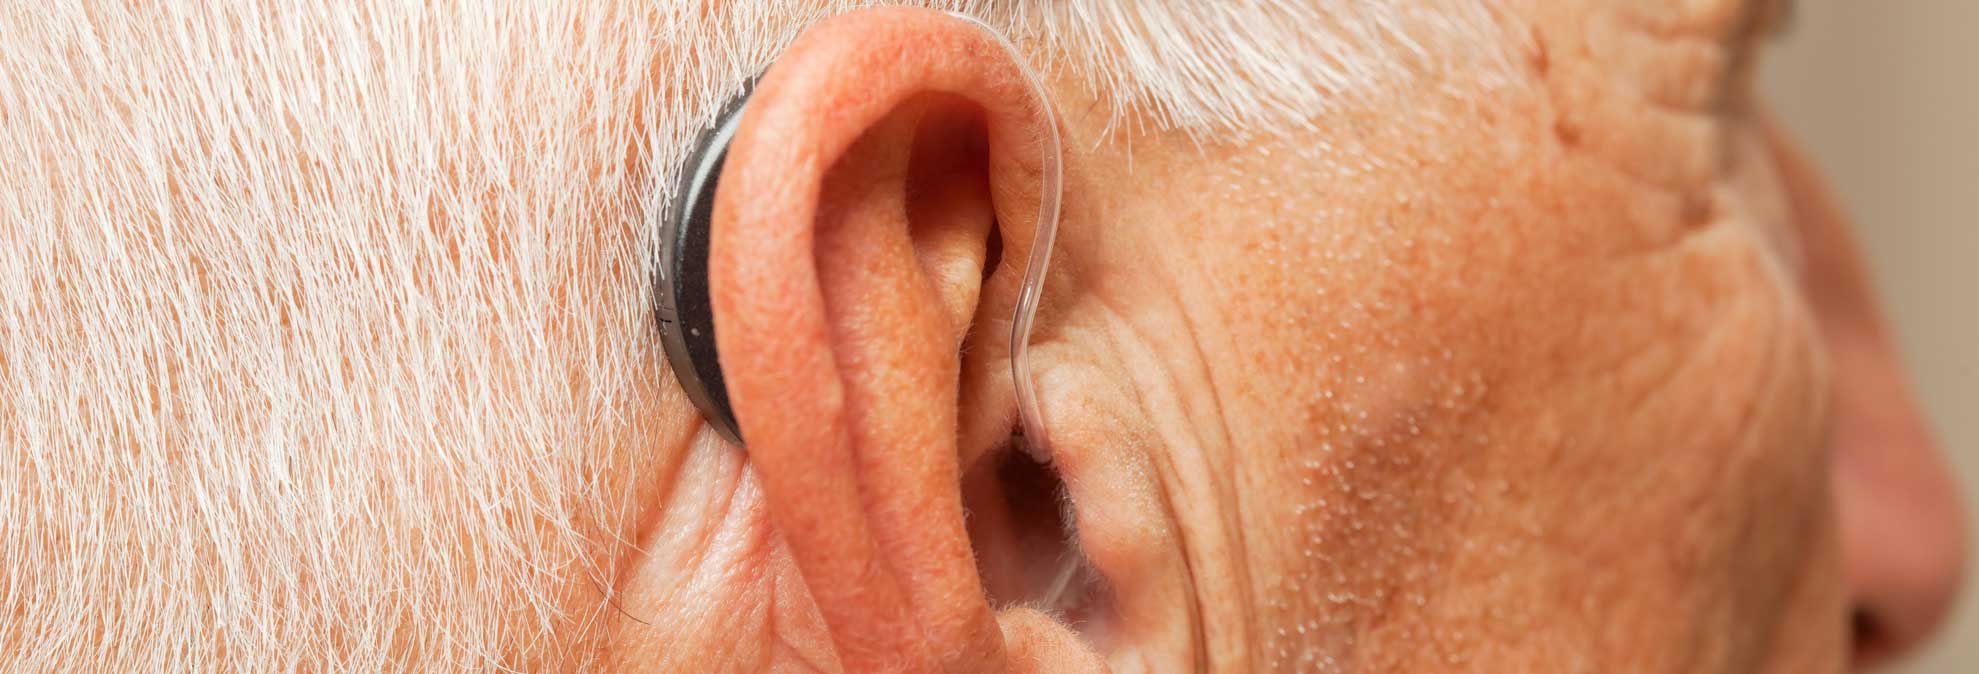 What You Need to Know When Buying a Hearing Aid - Consumer.